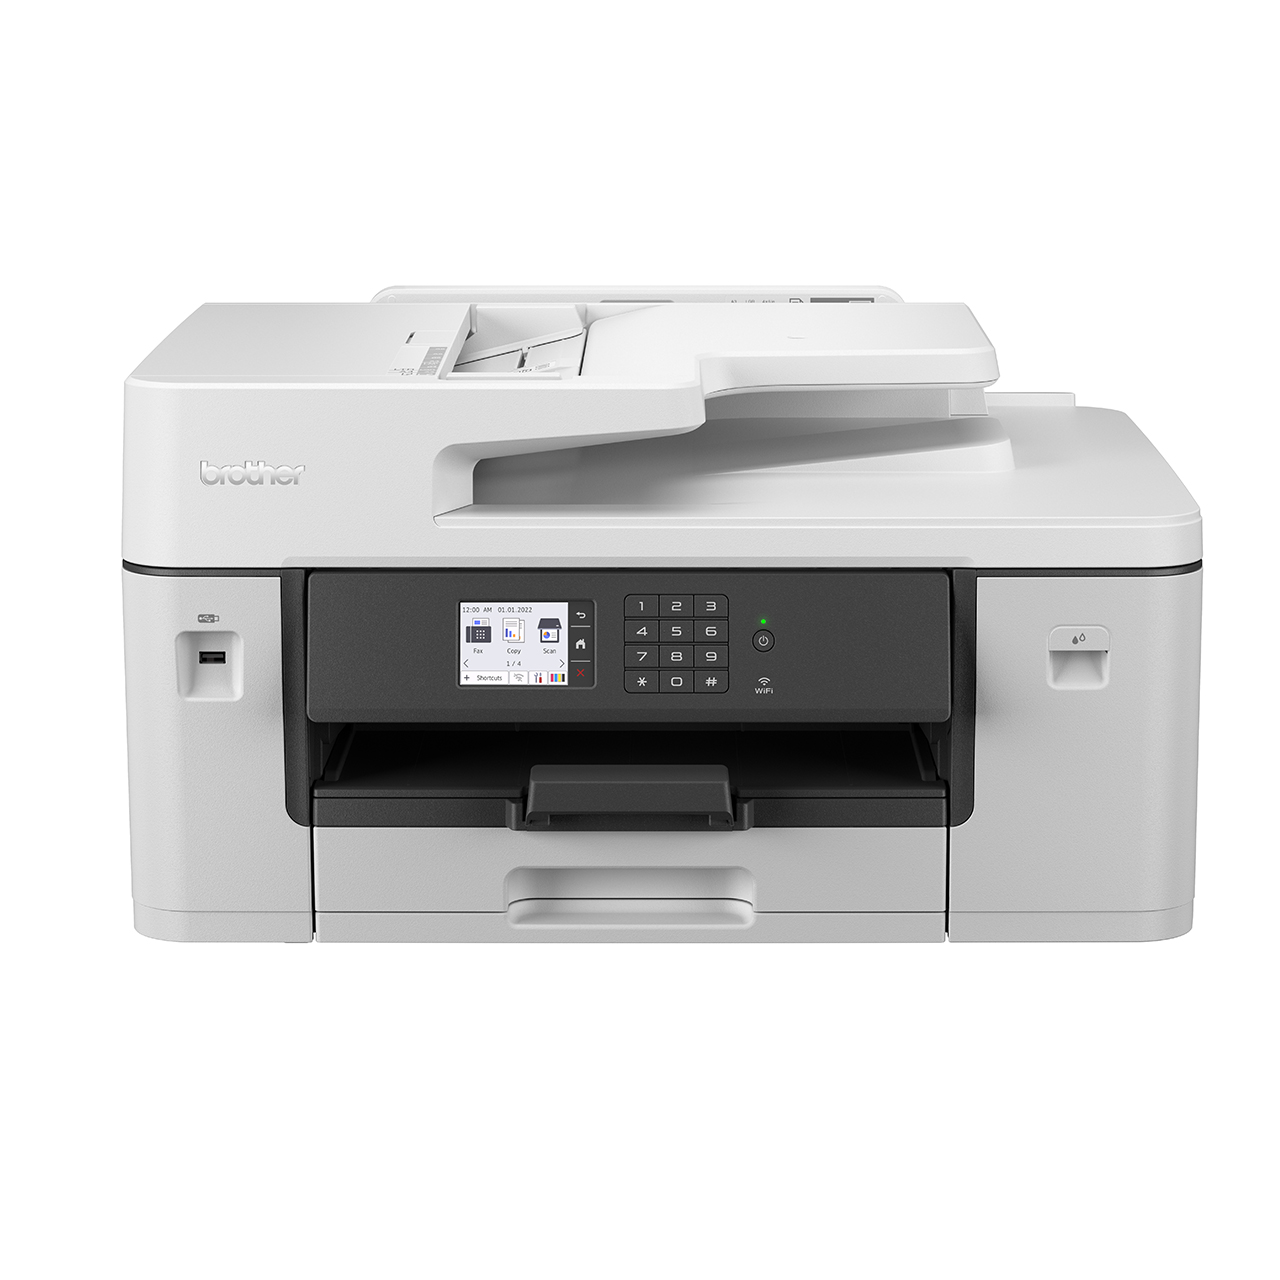 Brother MFC-J3540DW Professional A3 inkjet Wireless All-in-One Printer (8CH51300141)